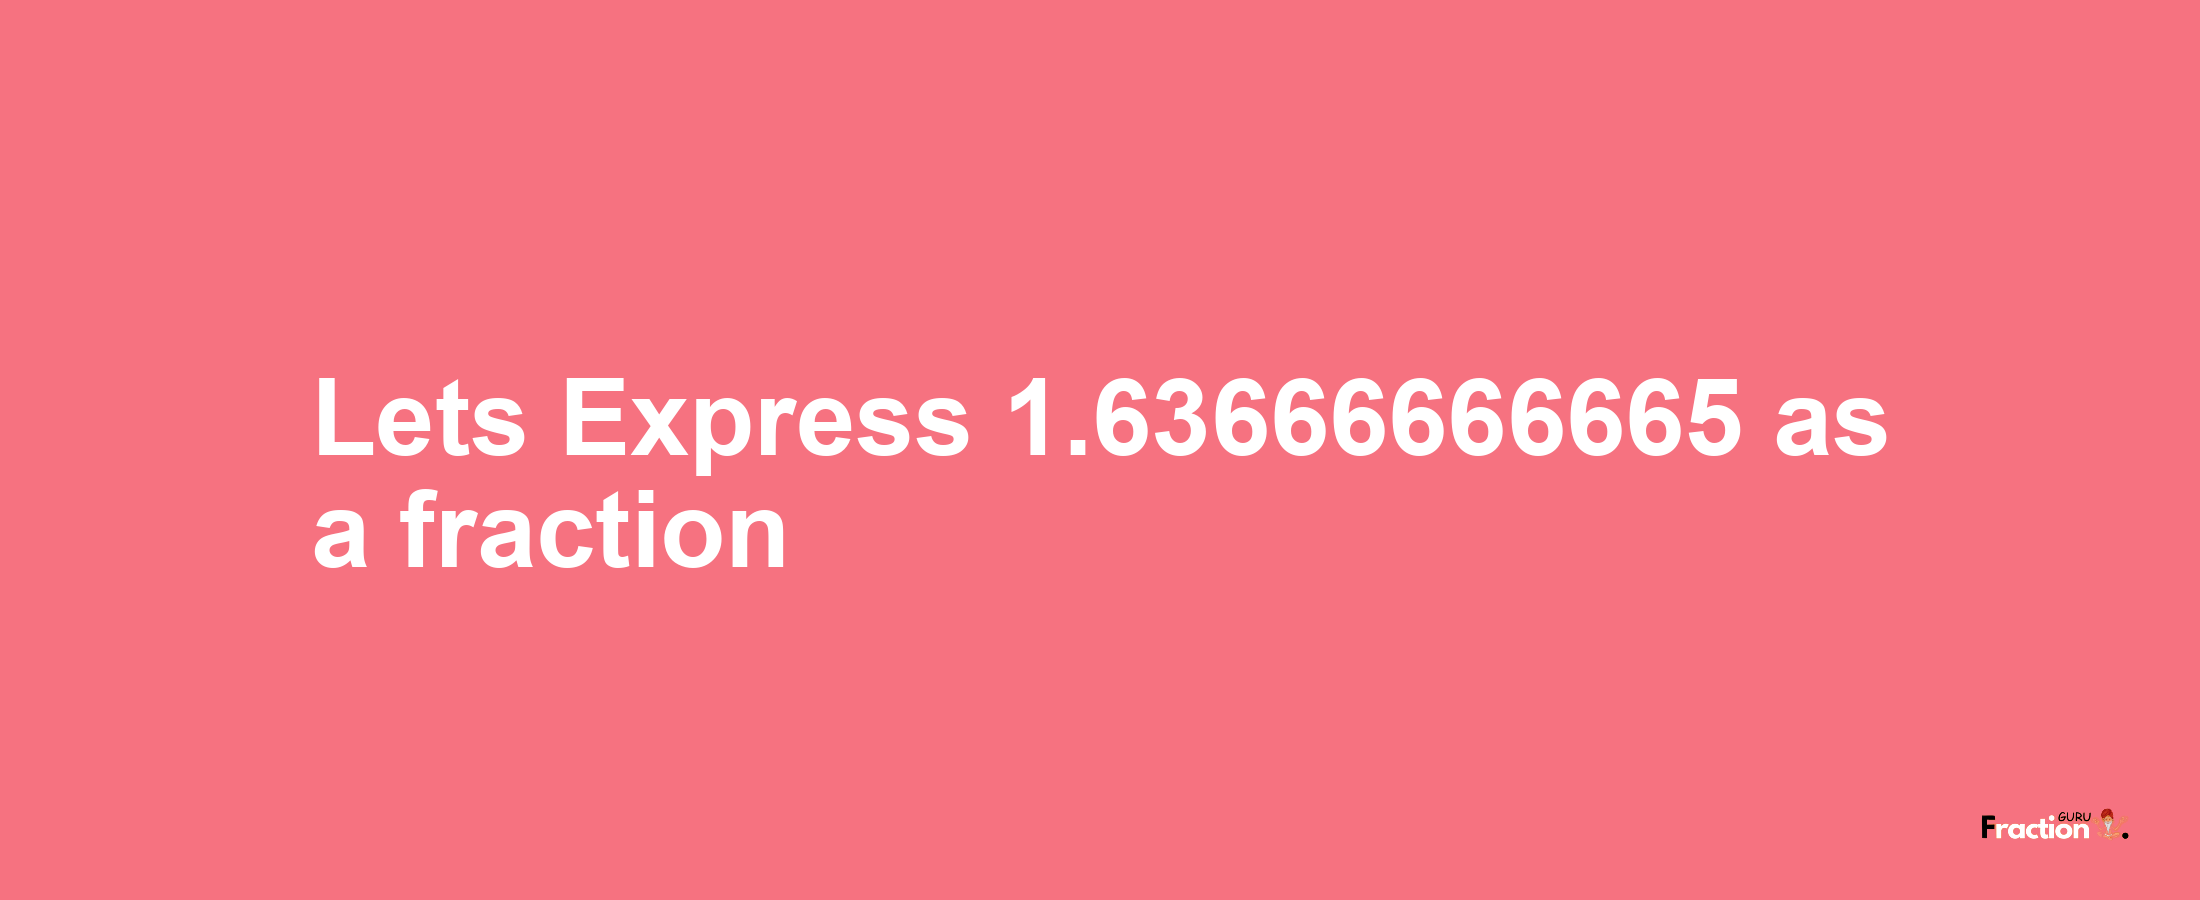 Lets Express 1.63666666665 as afraction